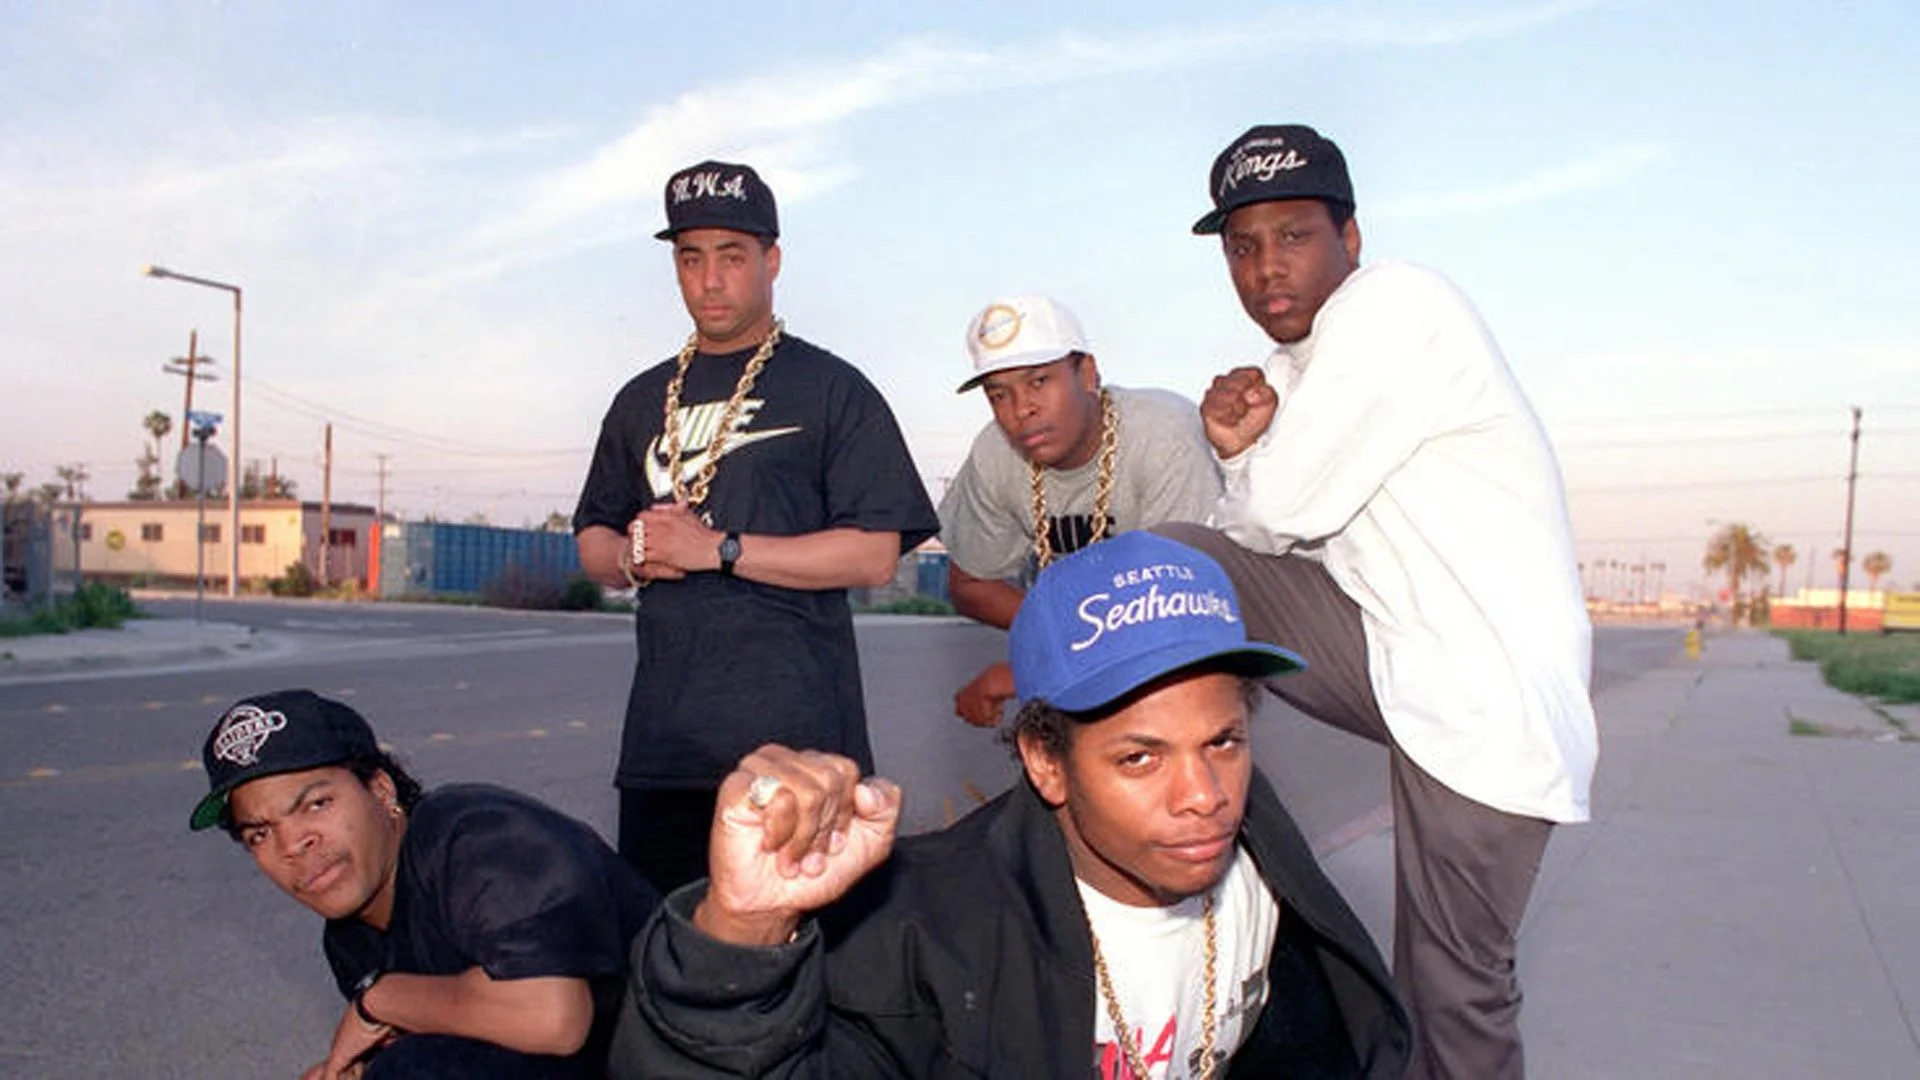 Members of rap group N.W.A are seen in this 1989 file photo. Back, from  left: D.J. Yella, Dr. Dre & MC Ren. Front, from left: Ice Cube and Easy E.  (Credit: …